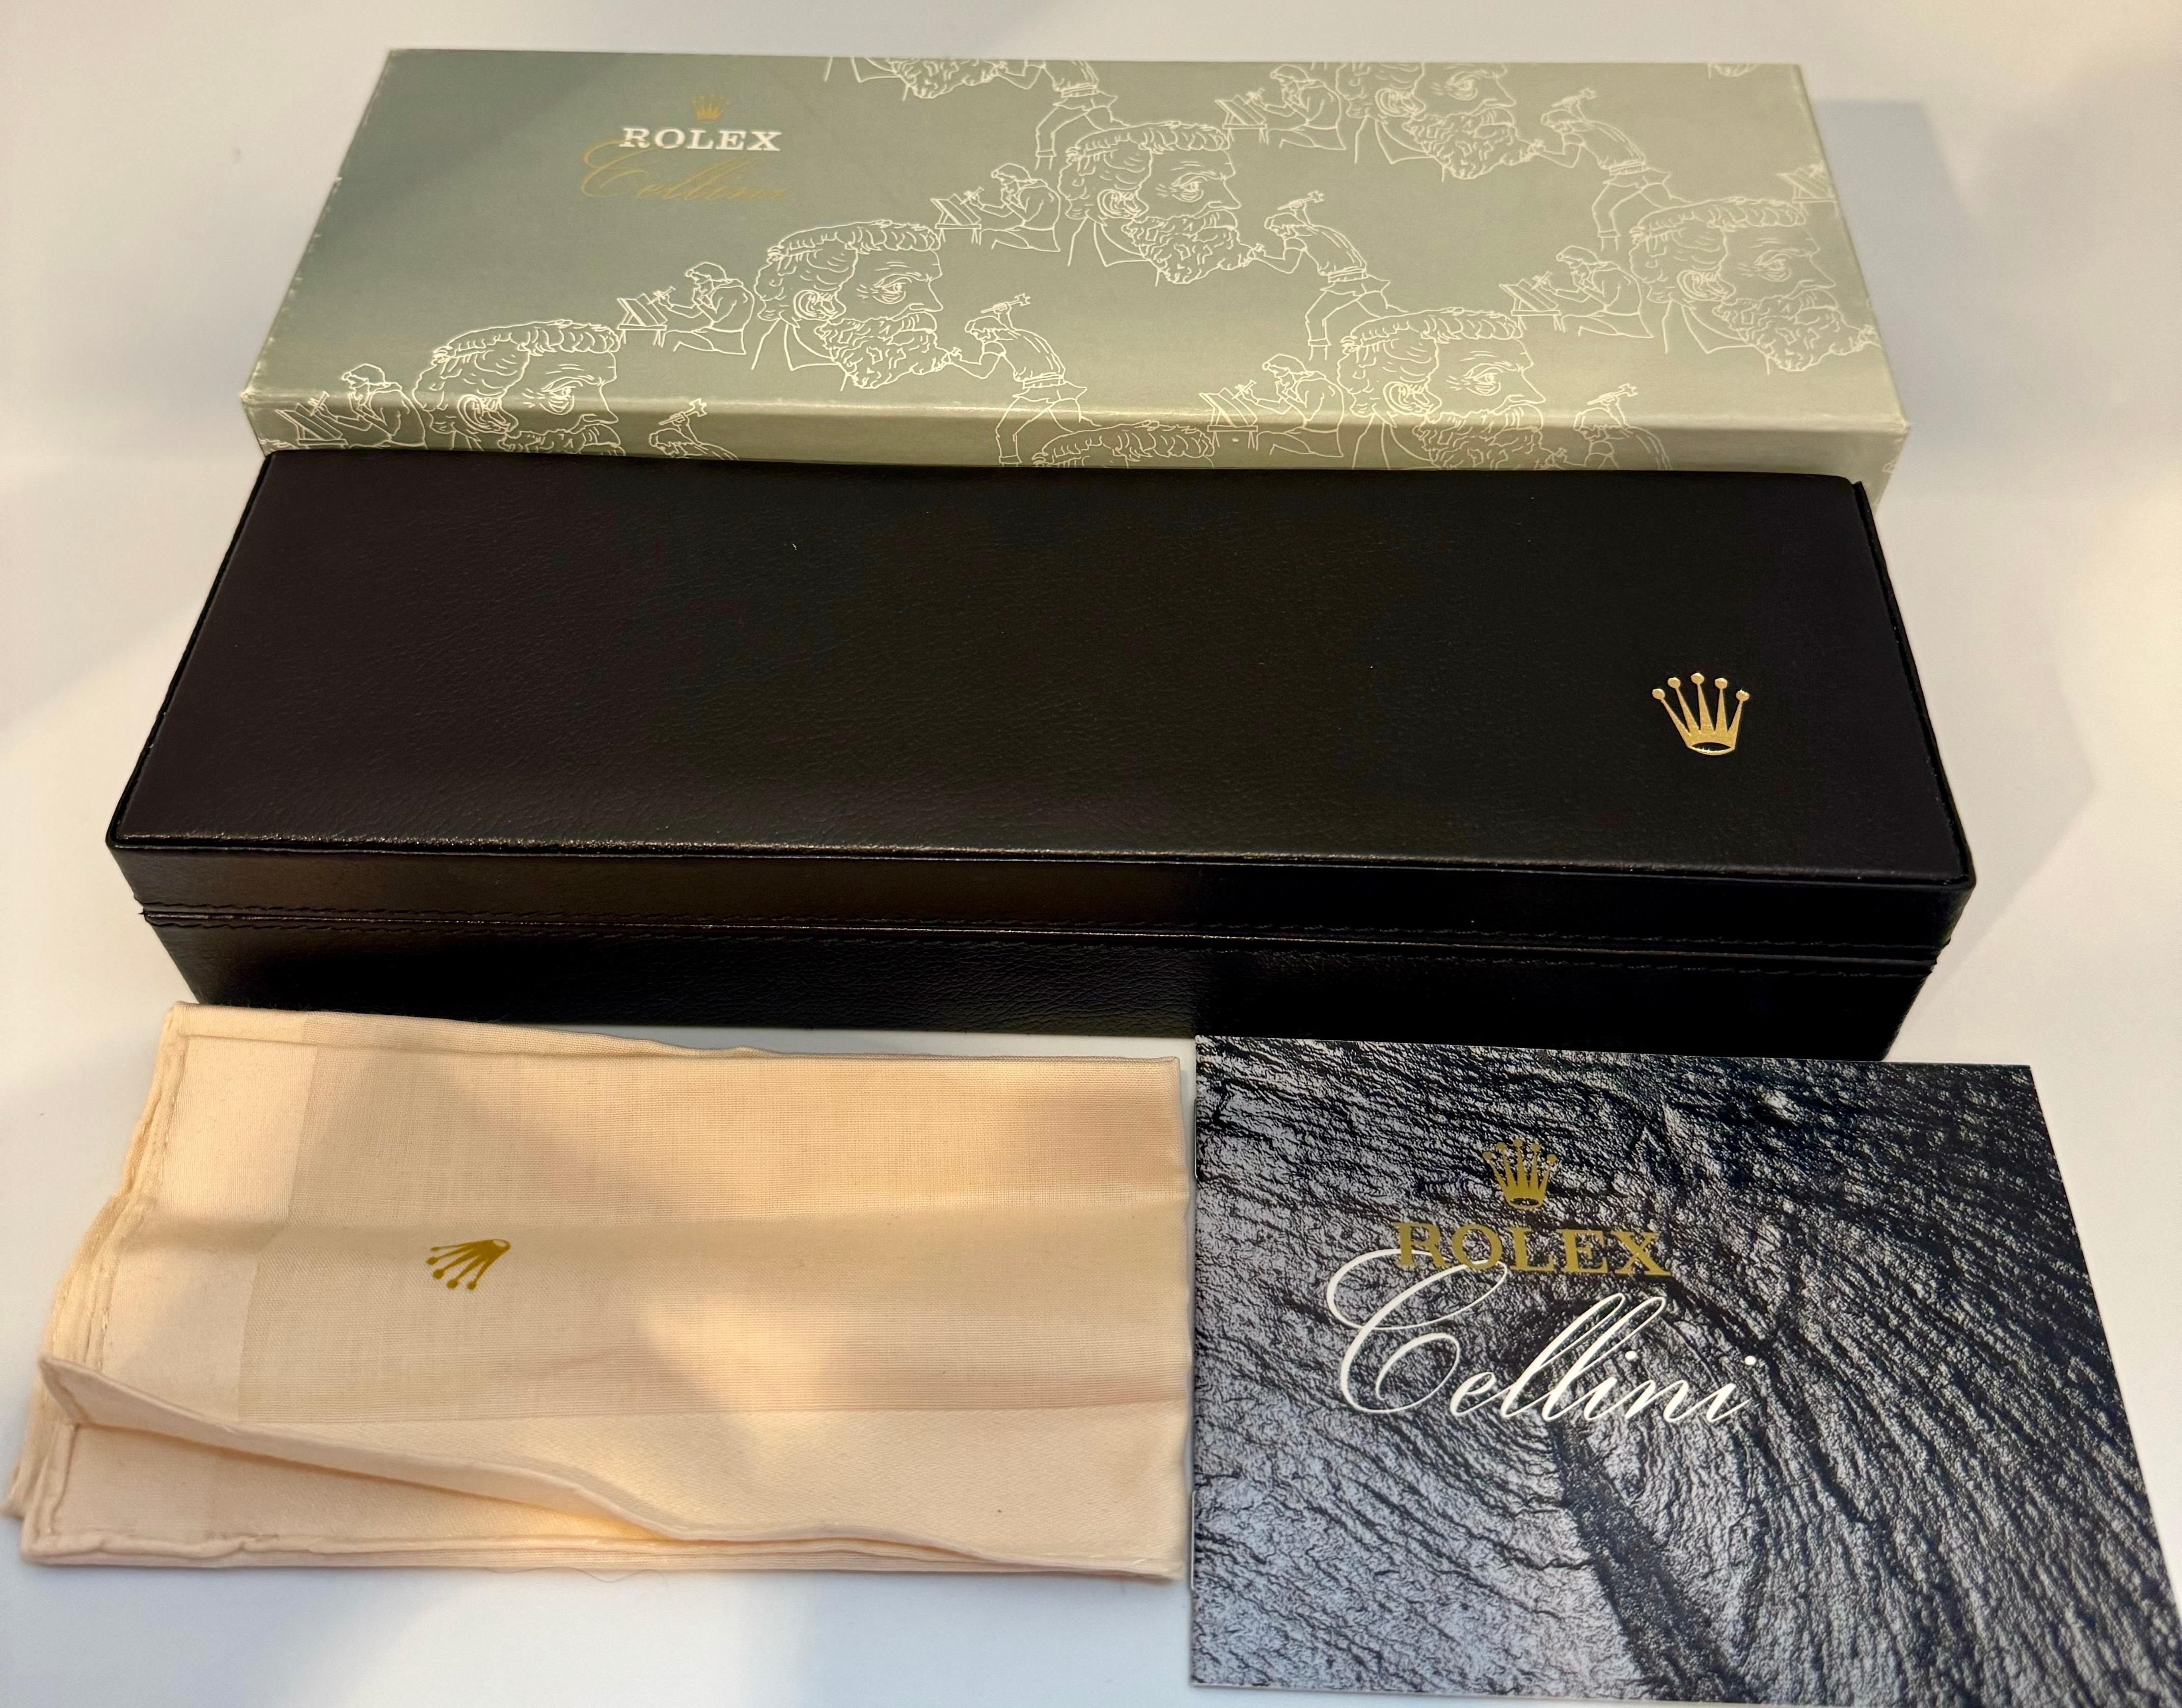 ROLEX watch case box CELLINI 
Brand New Watch BOX 
 Rolex was  purchased from show room in Manhattan 
 Watch was used for personal use and i am selling the box

Large Brand New Rolex Box
Complete and new Rolex box.

Large size 27 CMX 10 CMX 5